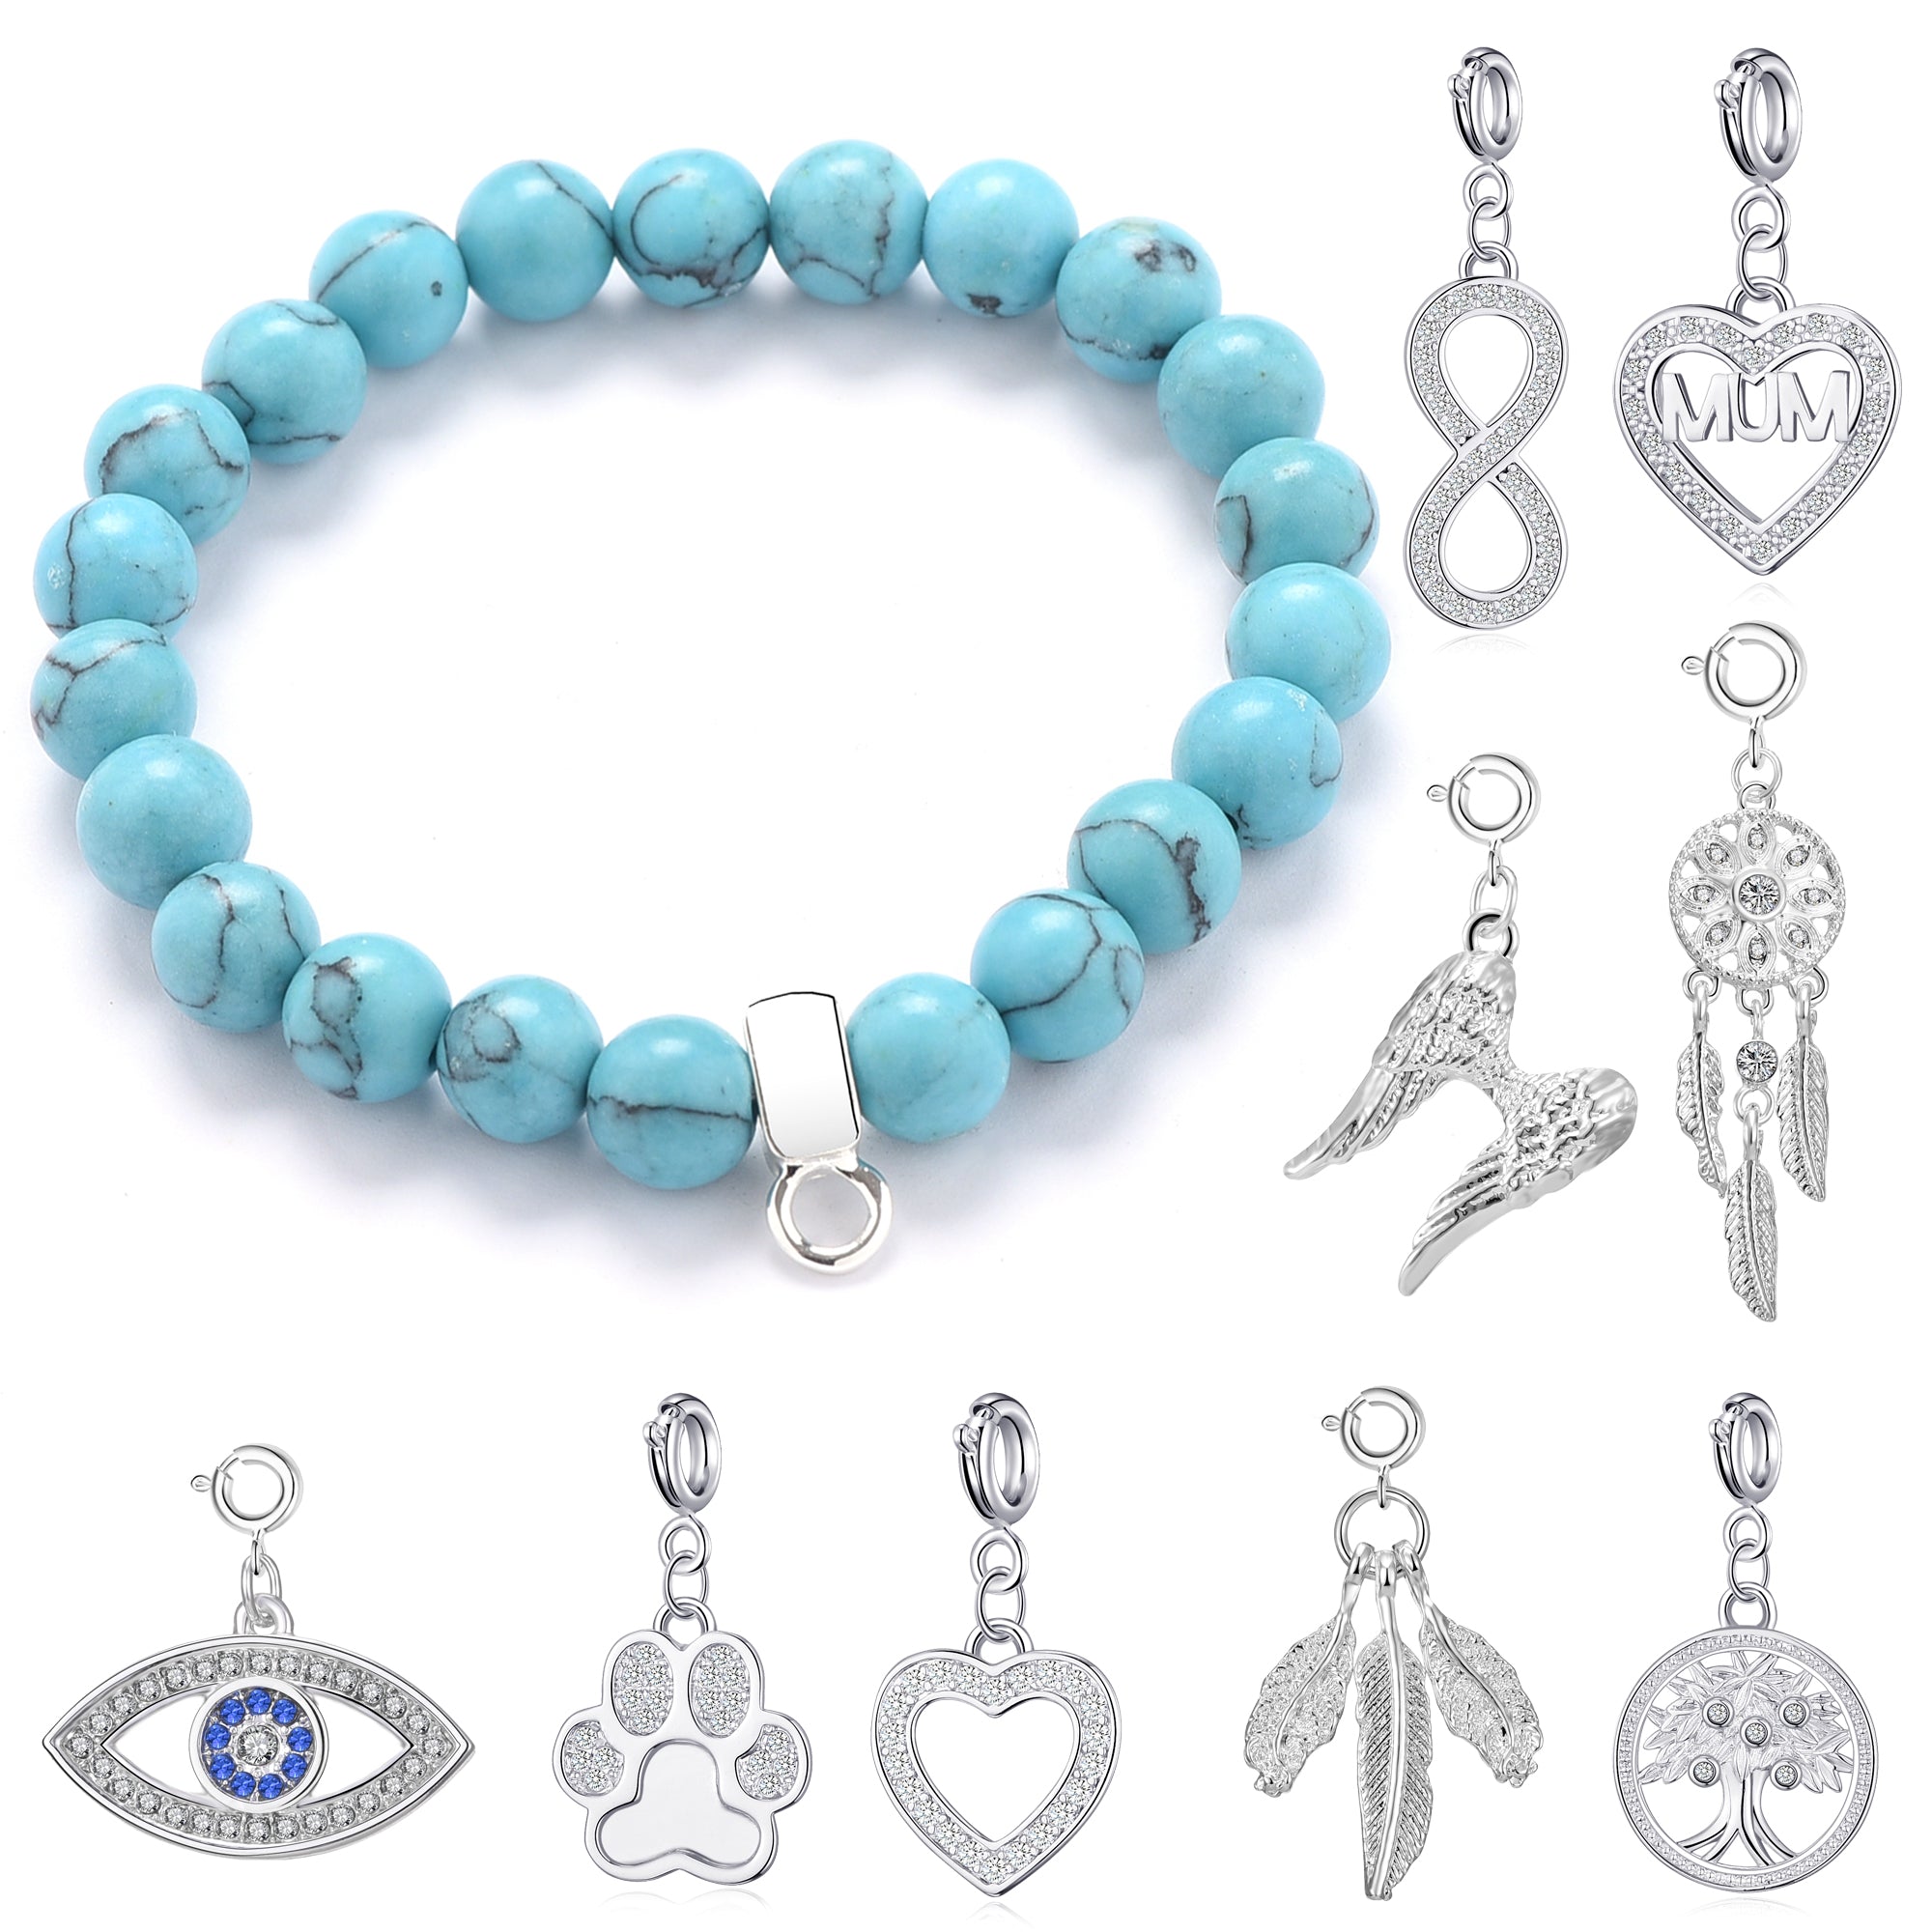 Synthetic Turquoise Gemstone Stretch Bracelet with Charm Created with Zircondia® Crystals by Philip Jones Jewellery